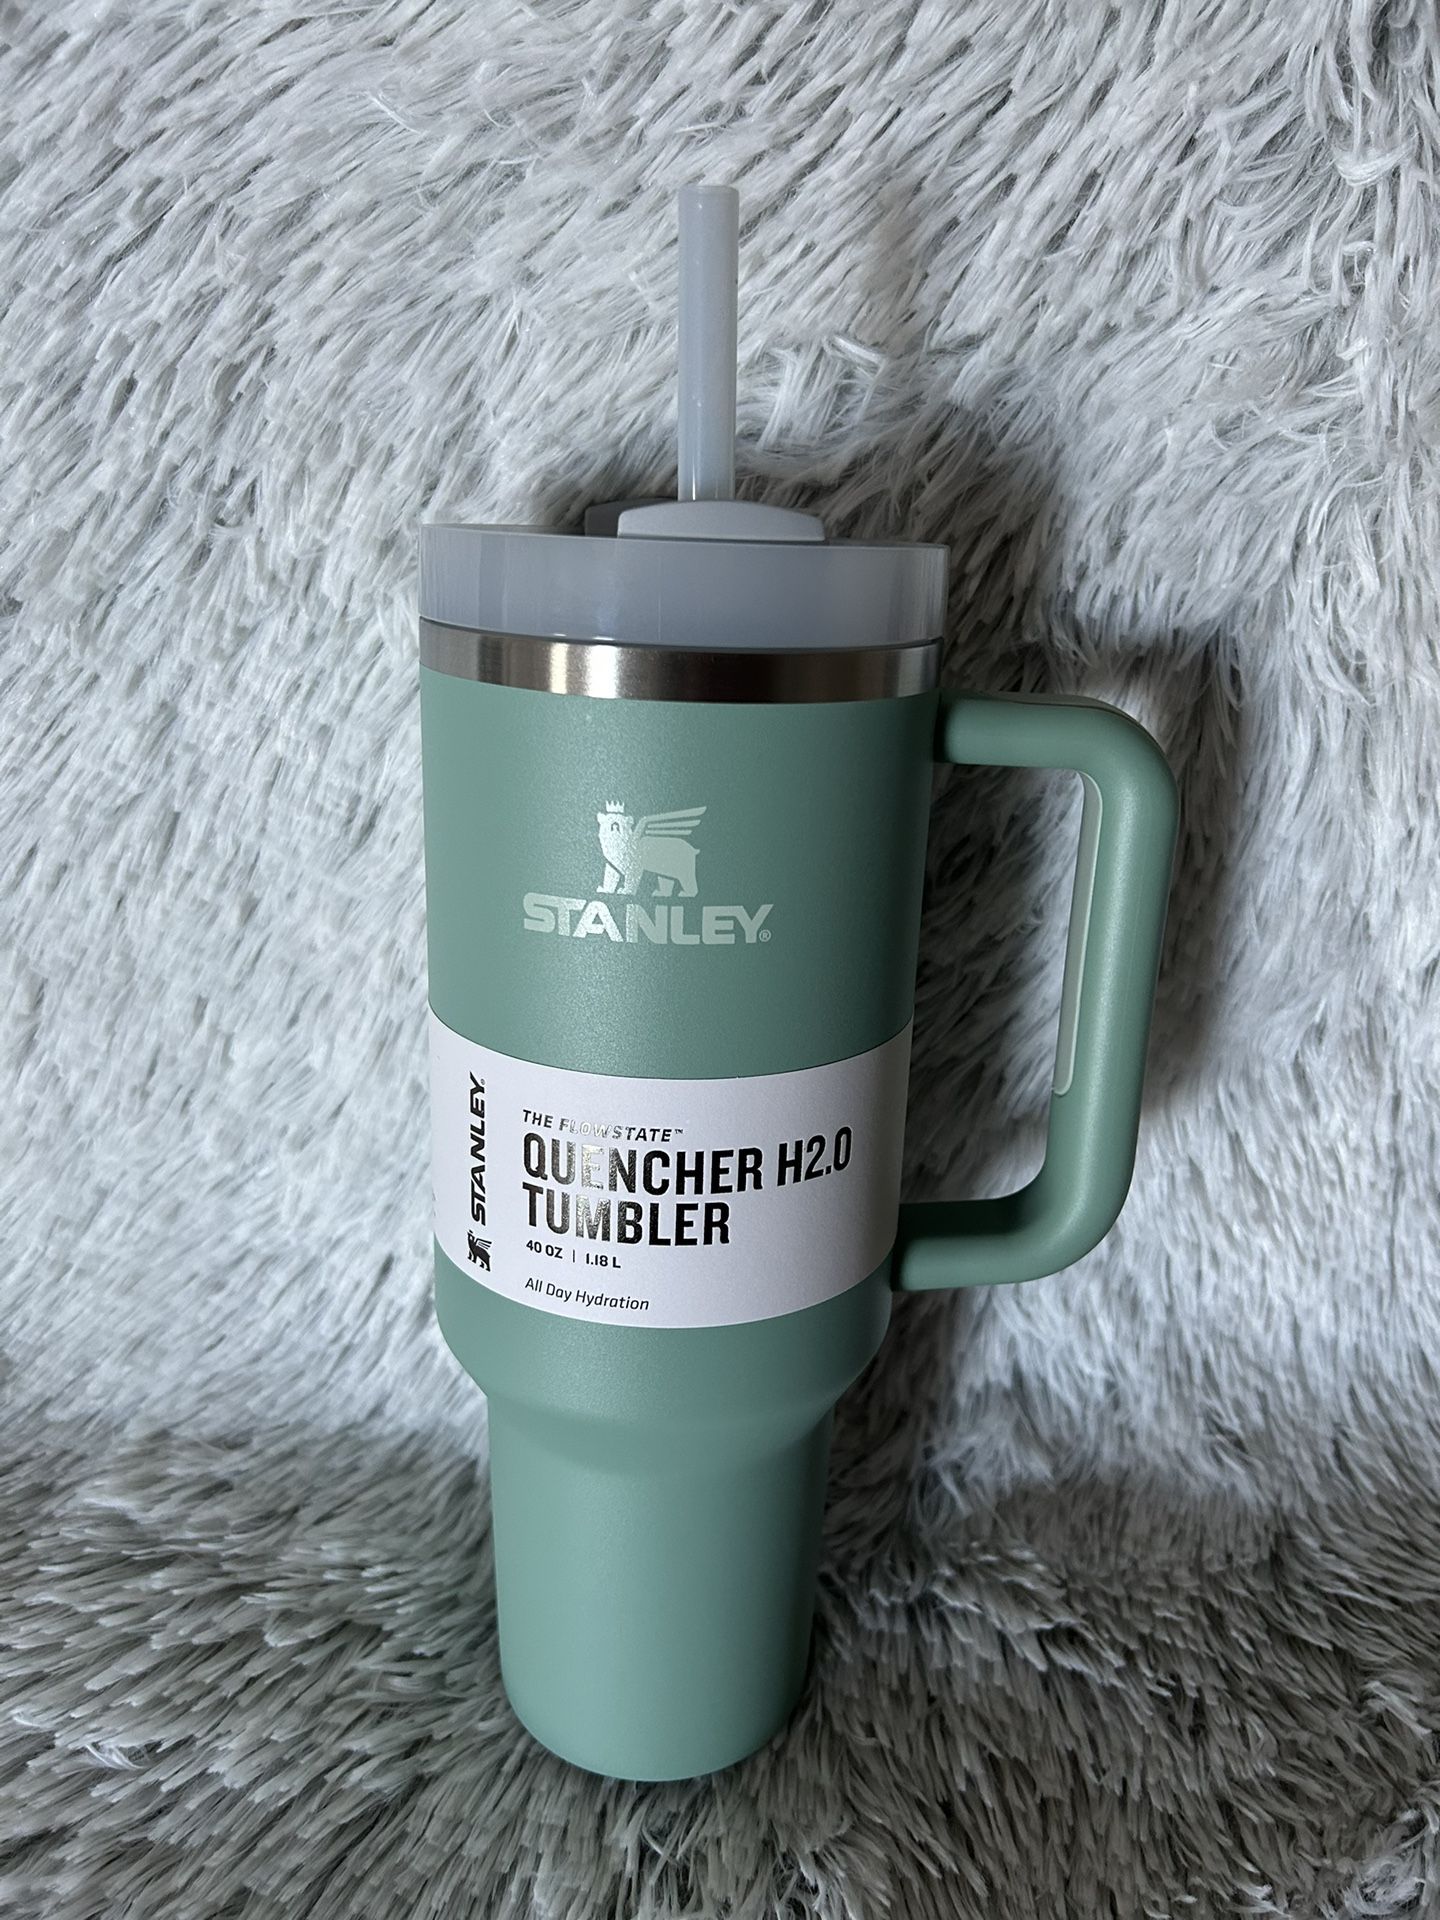 Stanley 40 oz. Quencher H2.0 FlowState Tumbler for Sale in Las